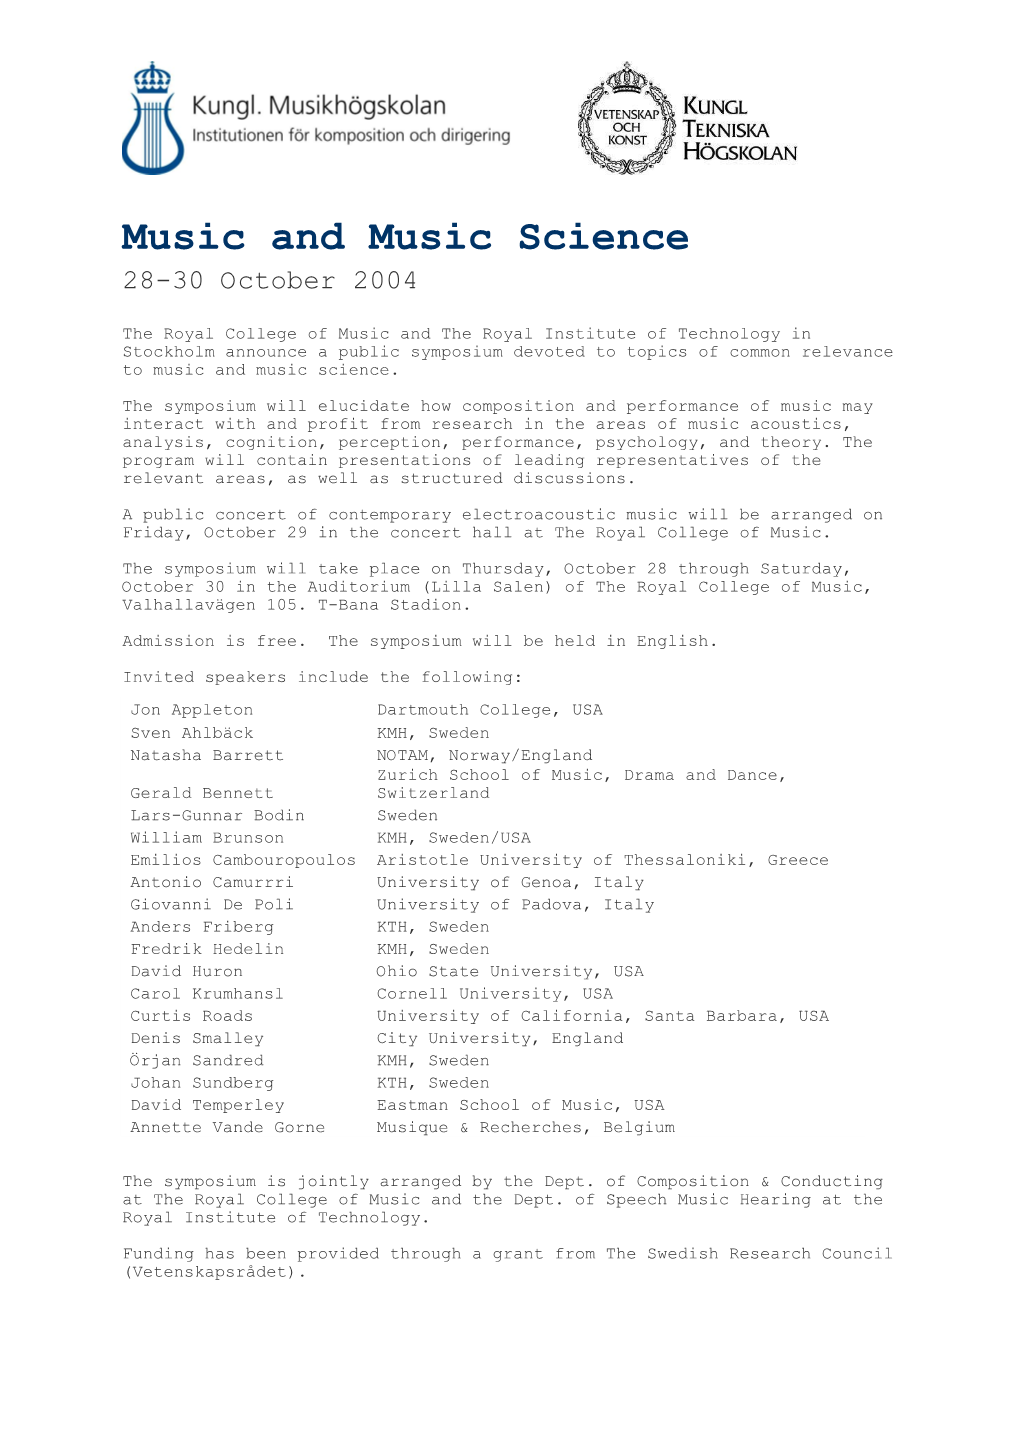 Music and Music Science 28-30 October 2004